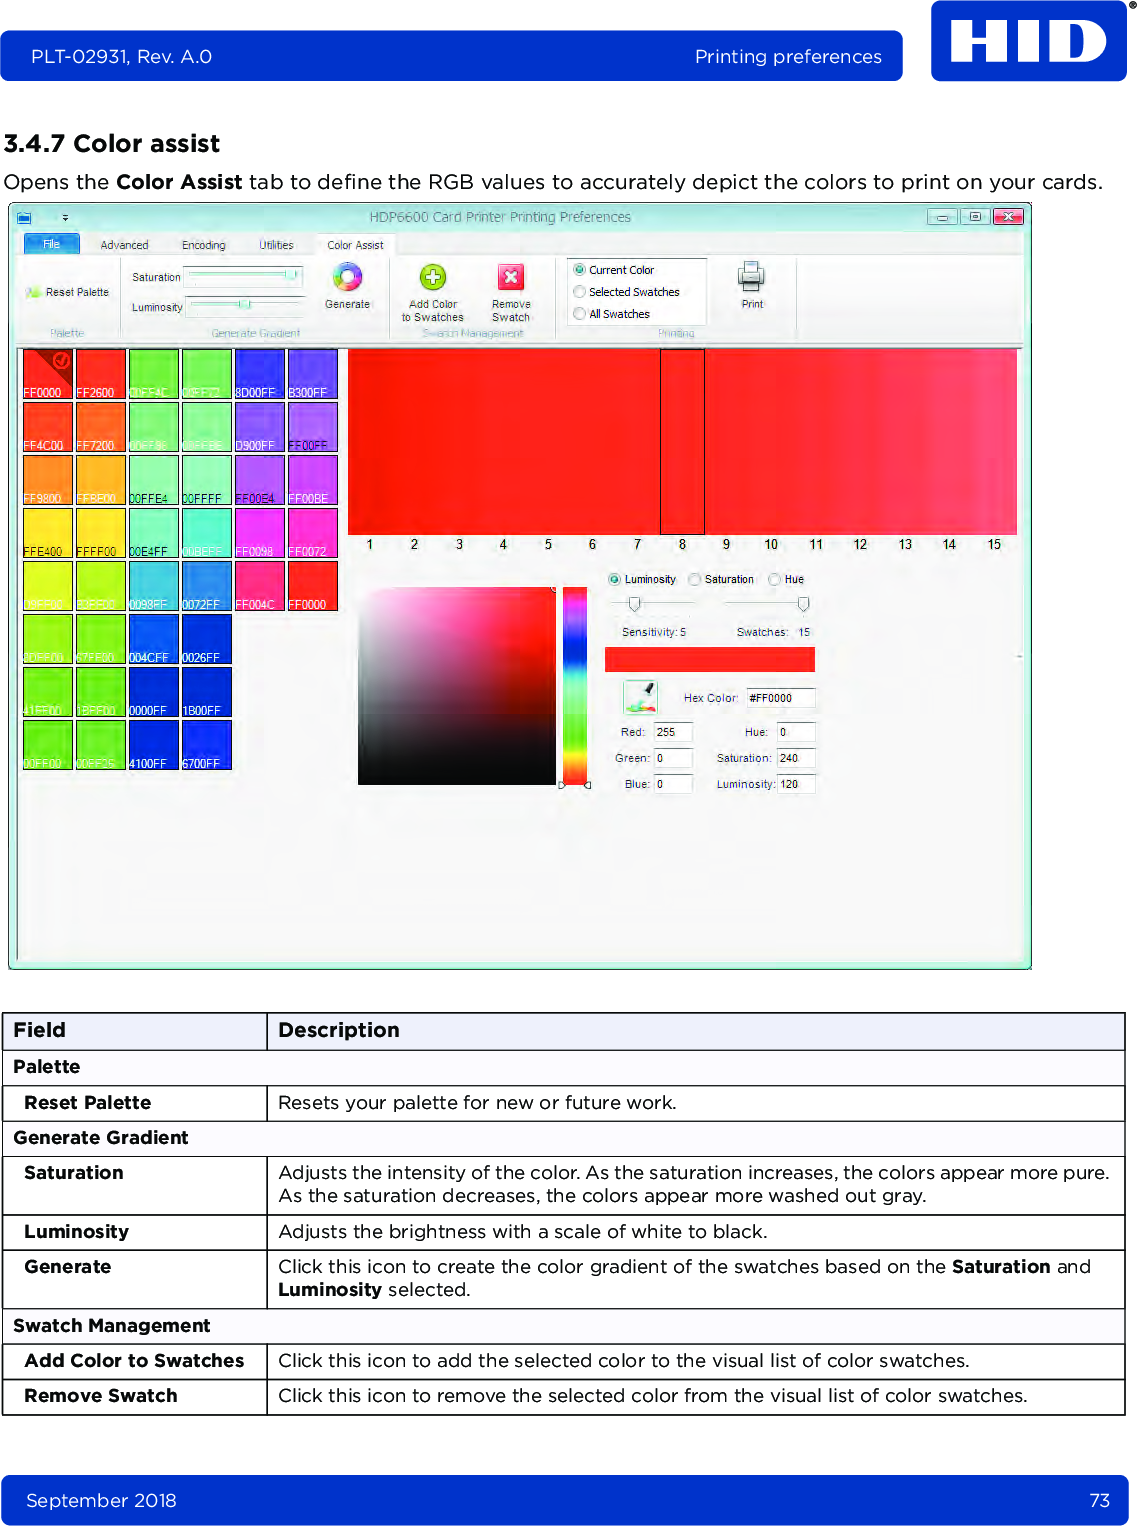 September 2018 73PLT-02931, Rev. A.0 Printing preferences3.4.7 Color assistOpens the Color Assist tab to define the RGB values to accurately depict the colors to print on your cards. Field DescriptionPaletteReset Palette Resets your palette for new or future work.Generate GradientSaturation Adjusts the intensity of the color. As the saturation increases, the colors appear more pure. As the saturation decreases, the colors appear more washed out gray.Luminosity Adjusts the brightness with a scale of white to black.Generate Click this icon to create the color gradient of the swatches based on the Saturation and Luminosity selected.Swatch ManagementAdd Color to Swatches Click this icon to add the selected color to the visual list of color swatches.Remove Swatch Click this icon to remove the selected color from the visual list of color swatches.